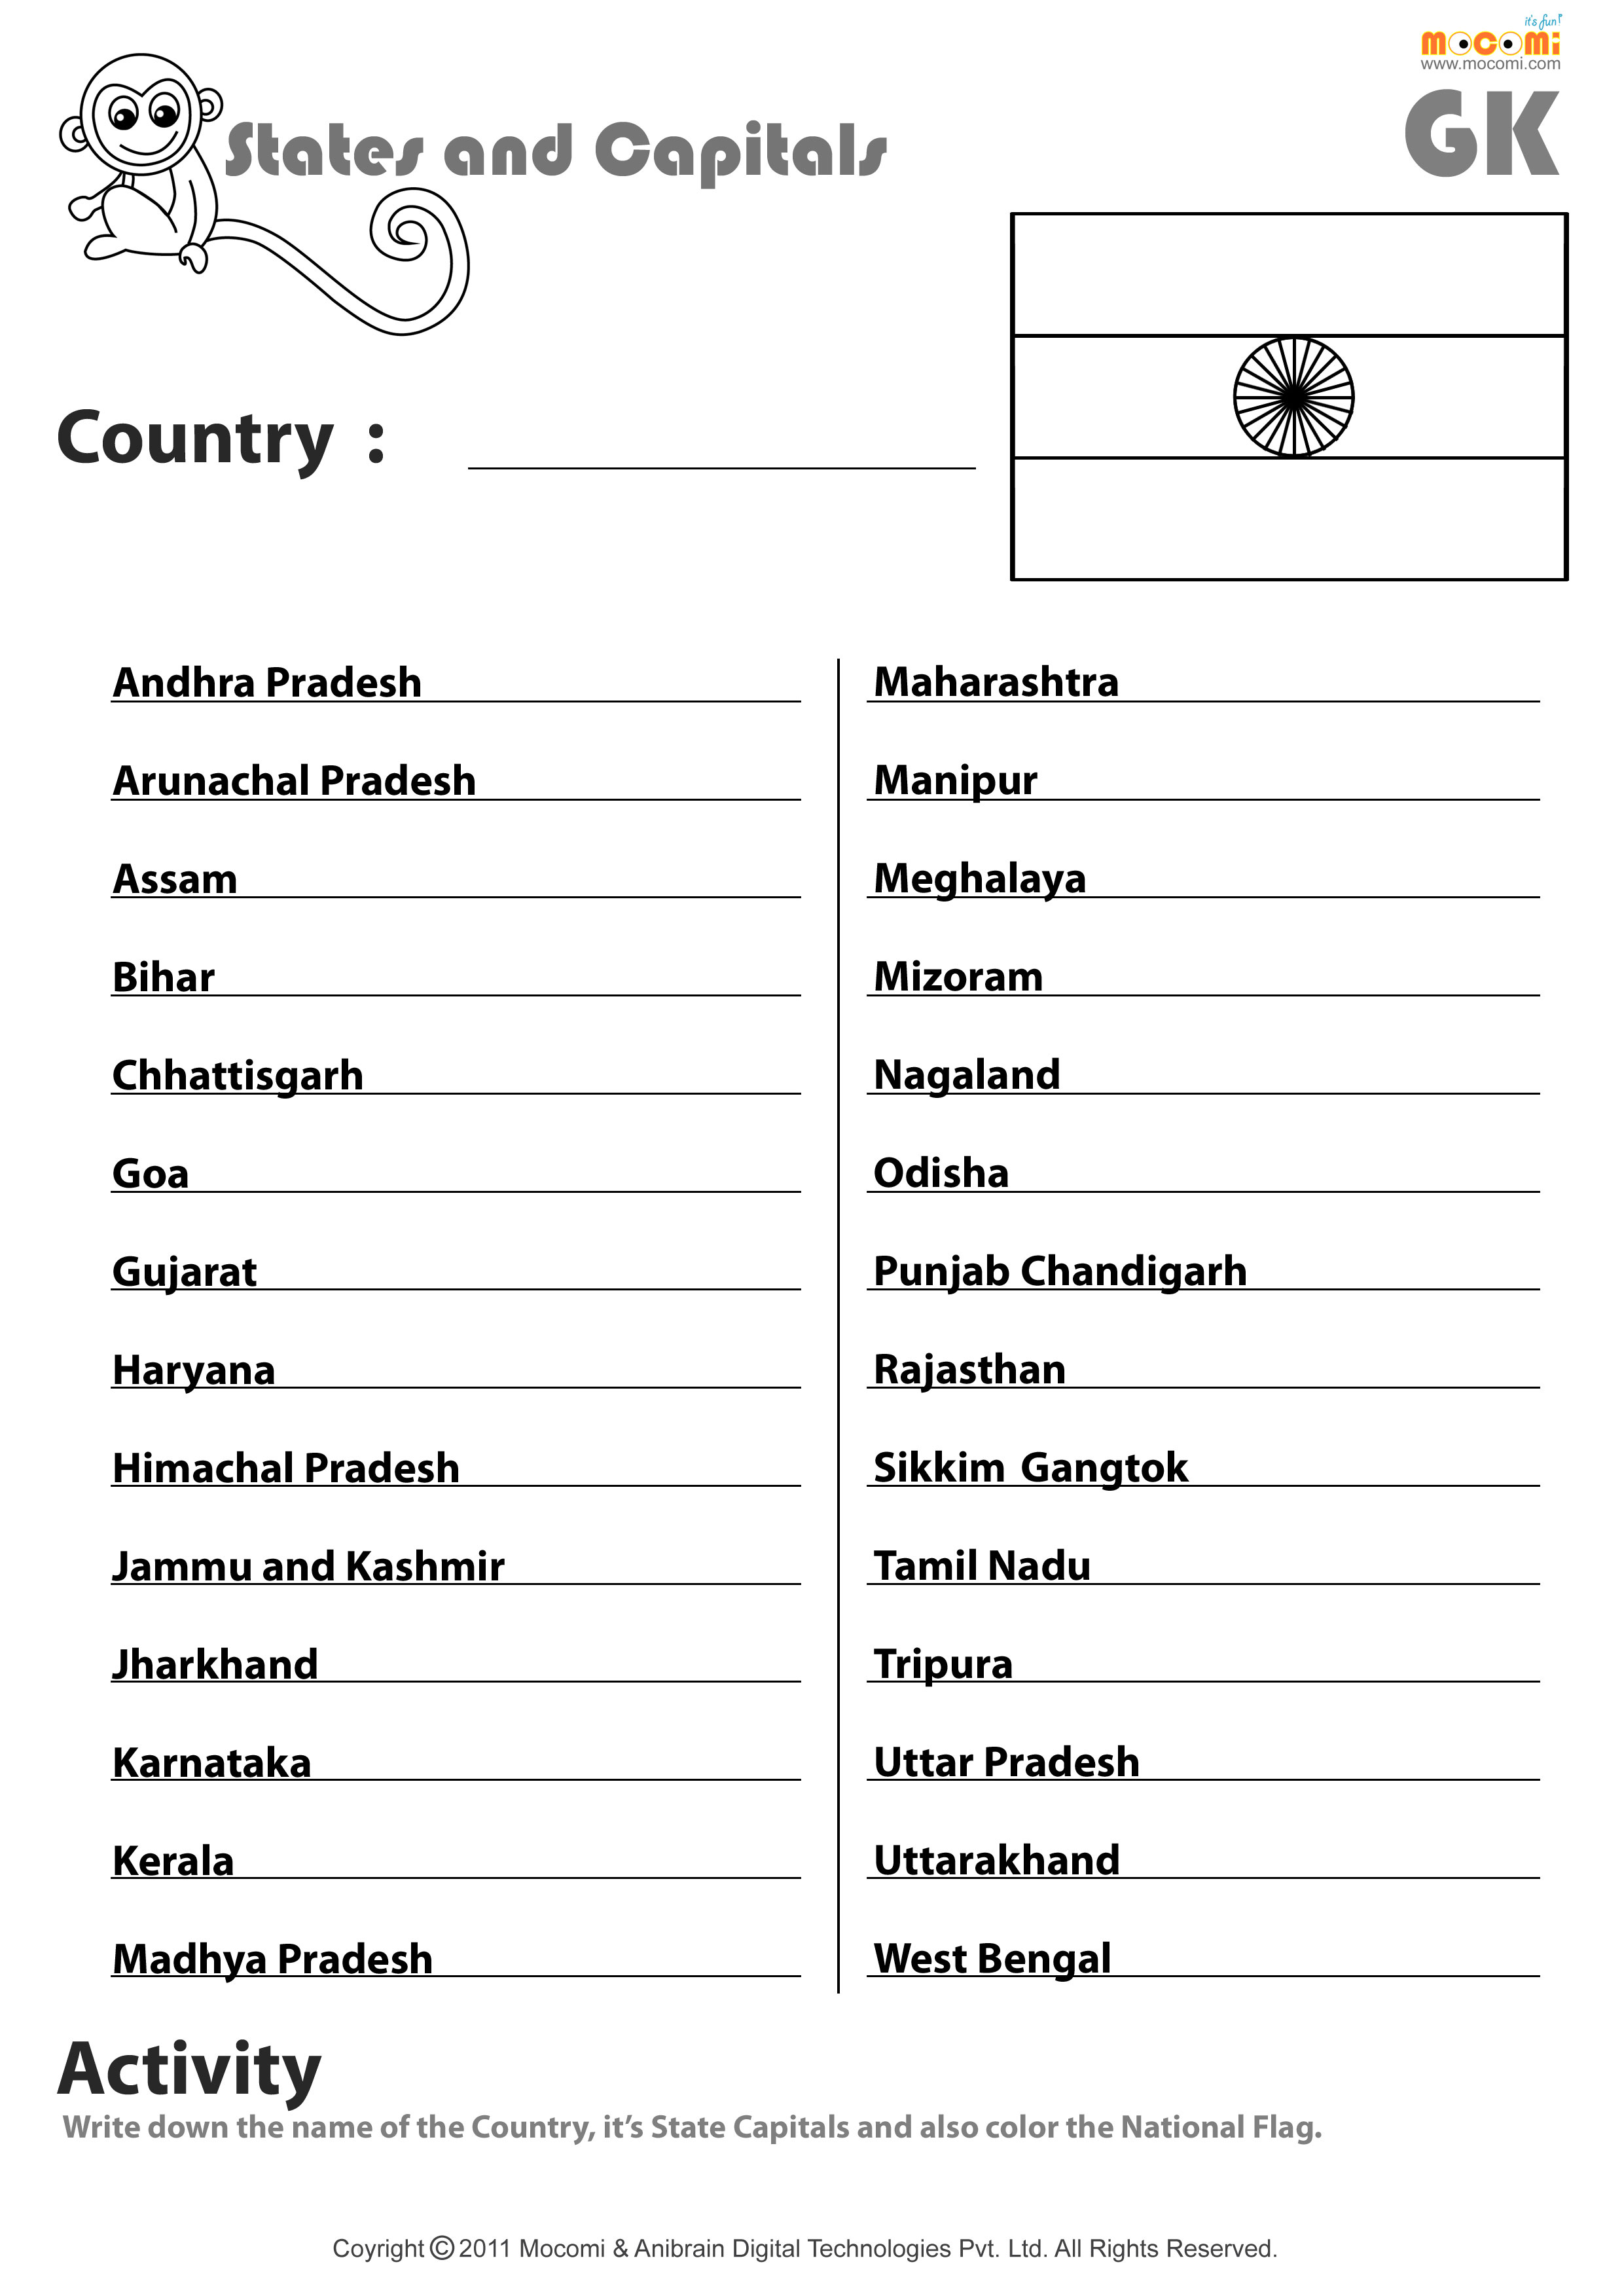 Indian States And Their Capitals Worksheet